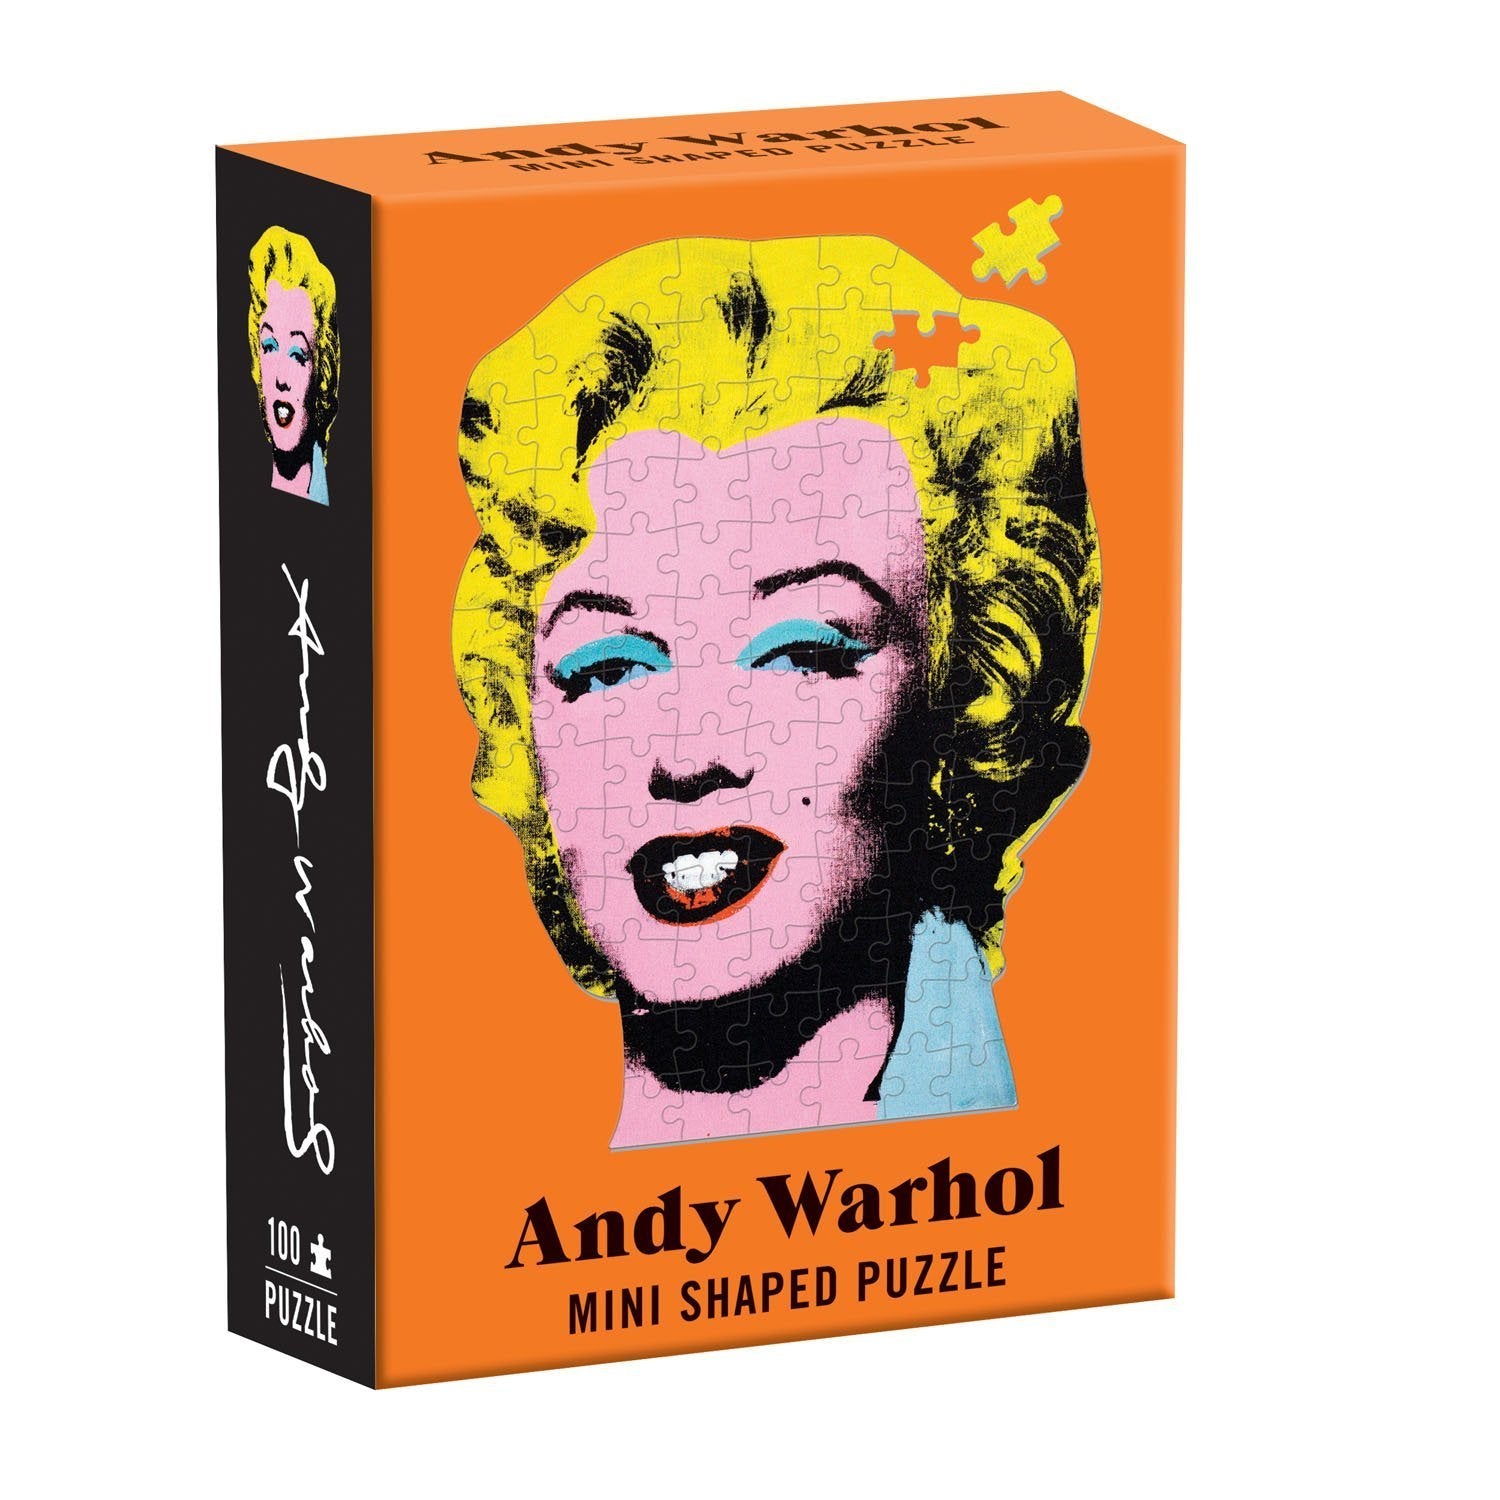 Andy Warhol Mini Shaped Puzzles - The Brant Foundation Shop